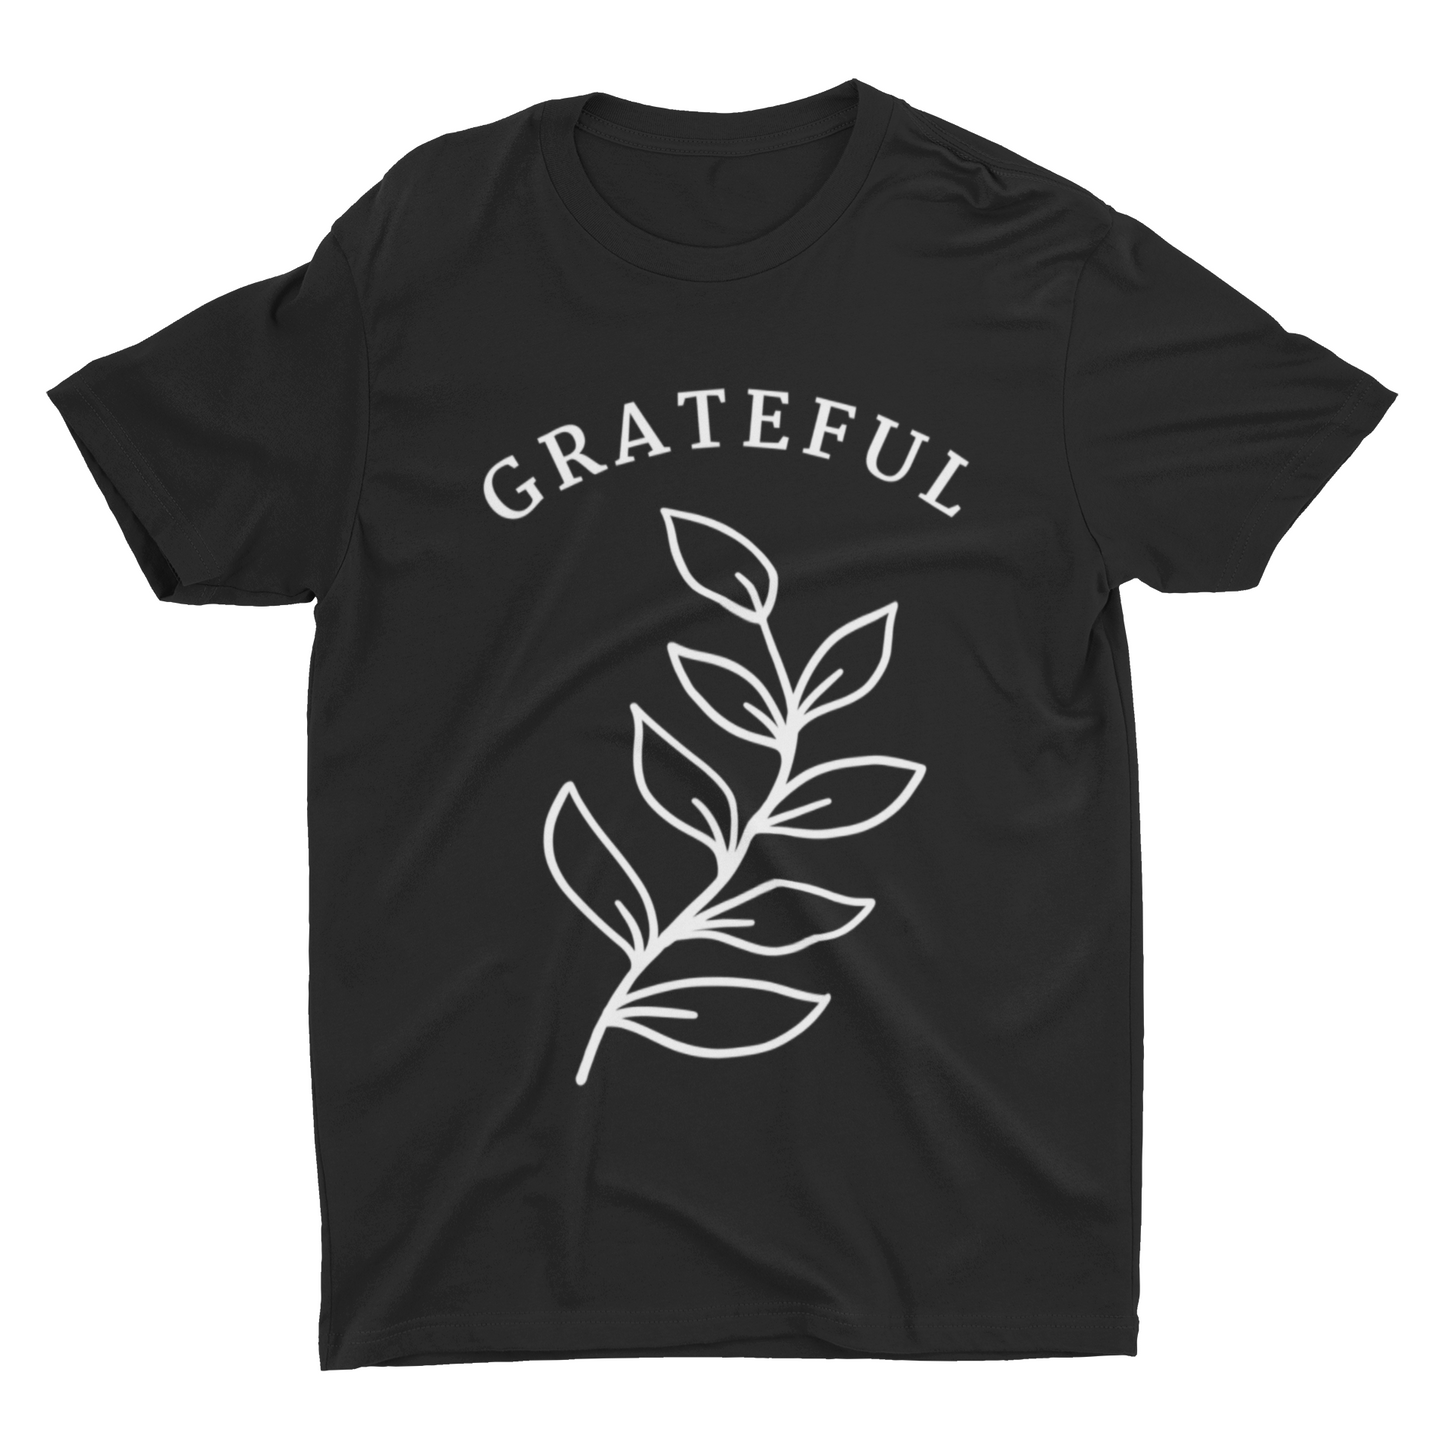 Grateful graphic t-shirt for fall